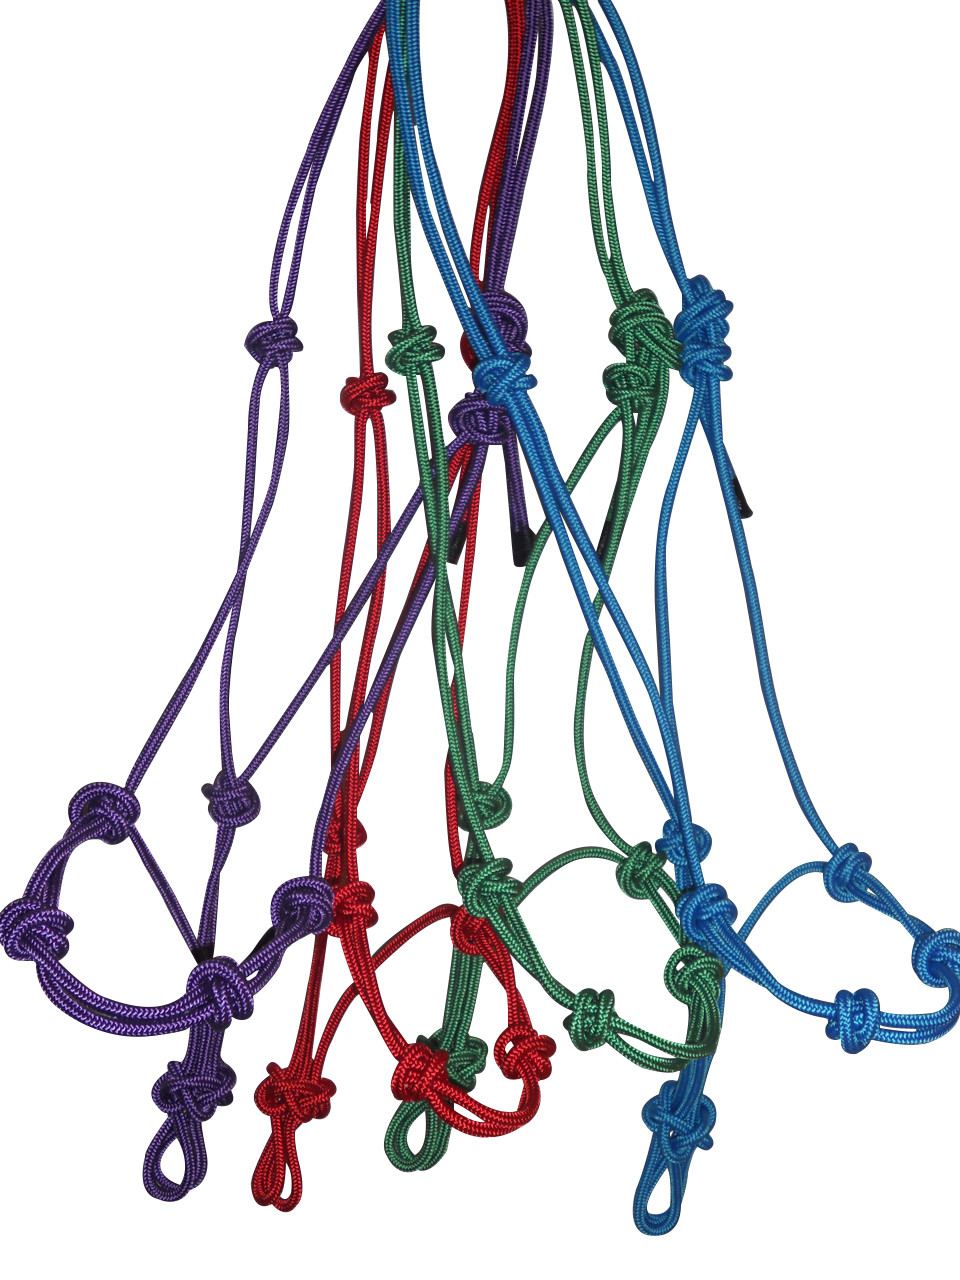 STIFF 4-KNOT HALTER 14' LEAD ROPE FOR ANDERSON & PARELLI TRAINING 